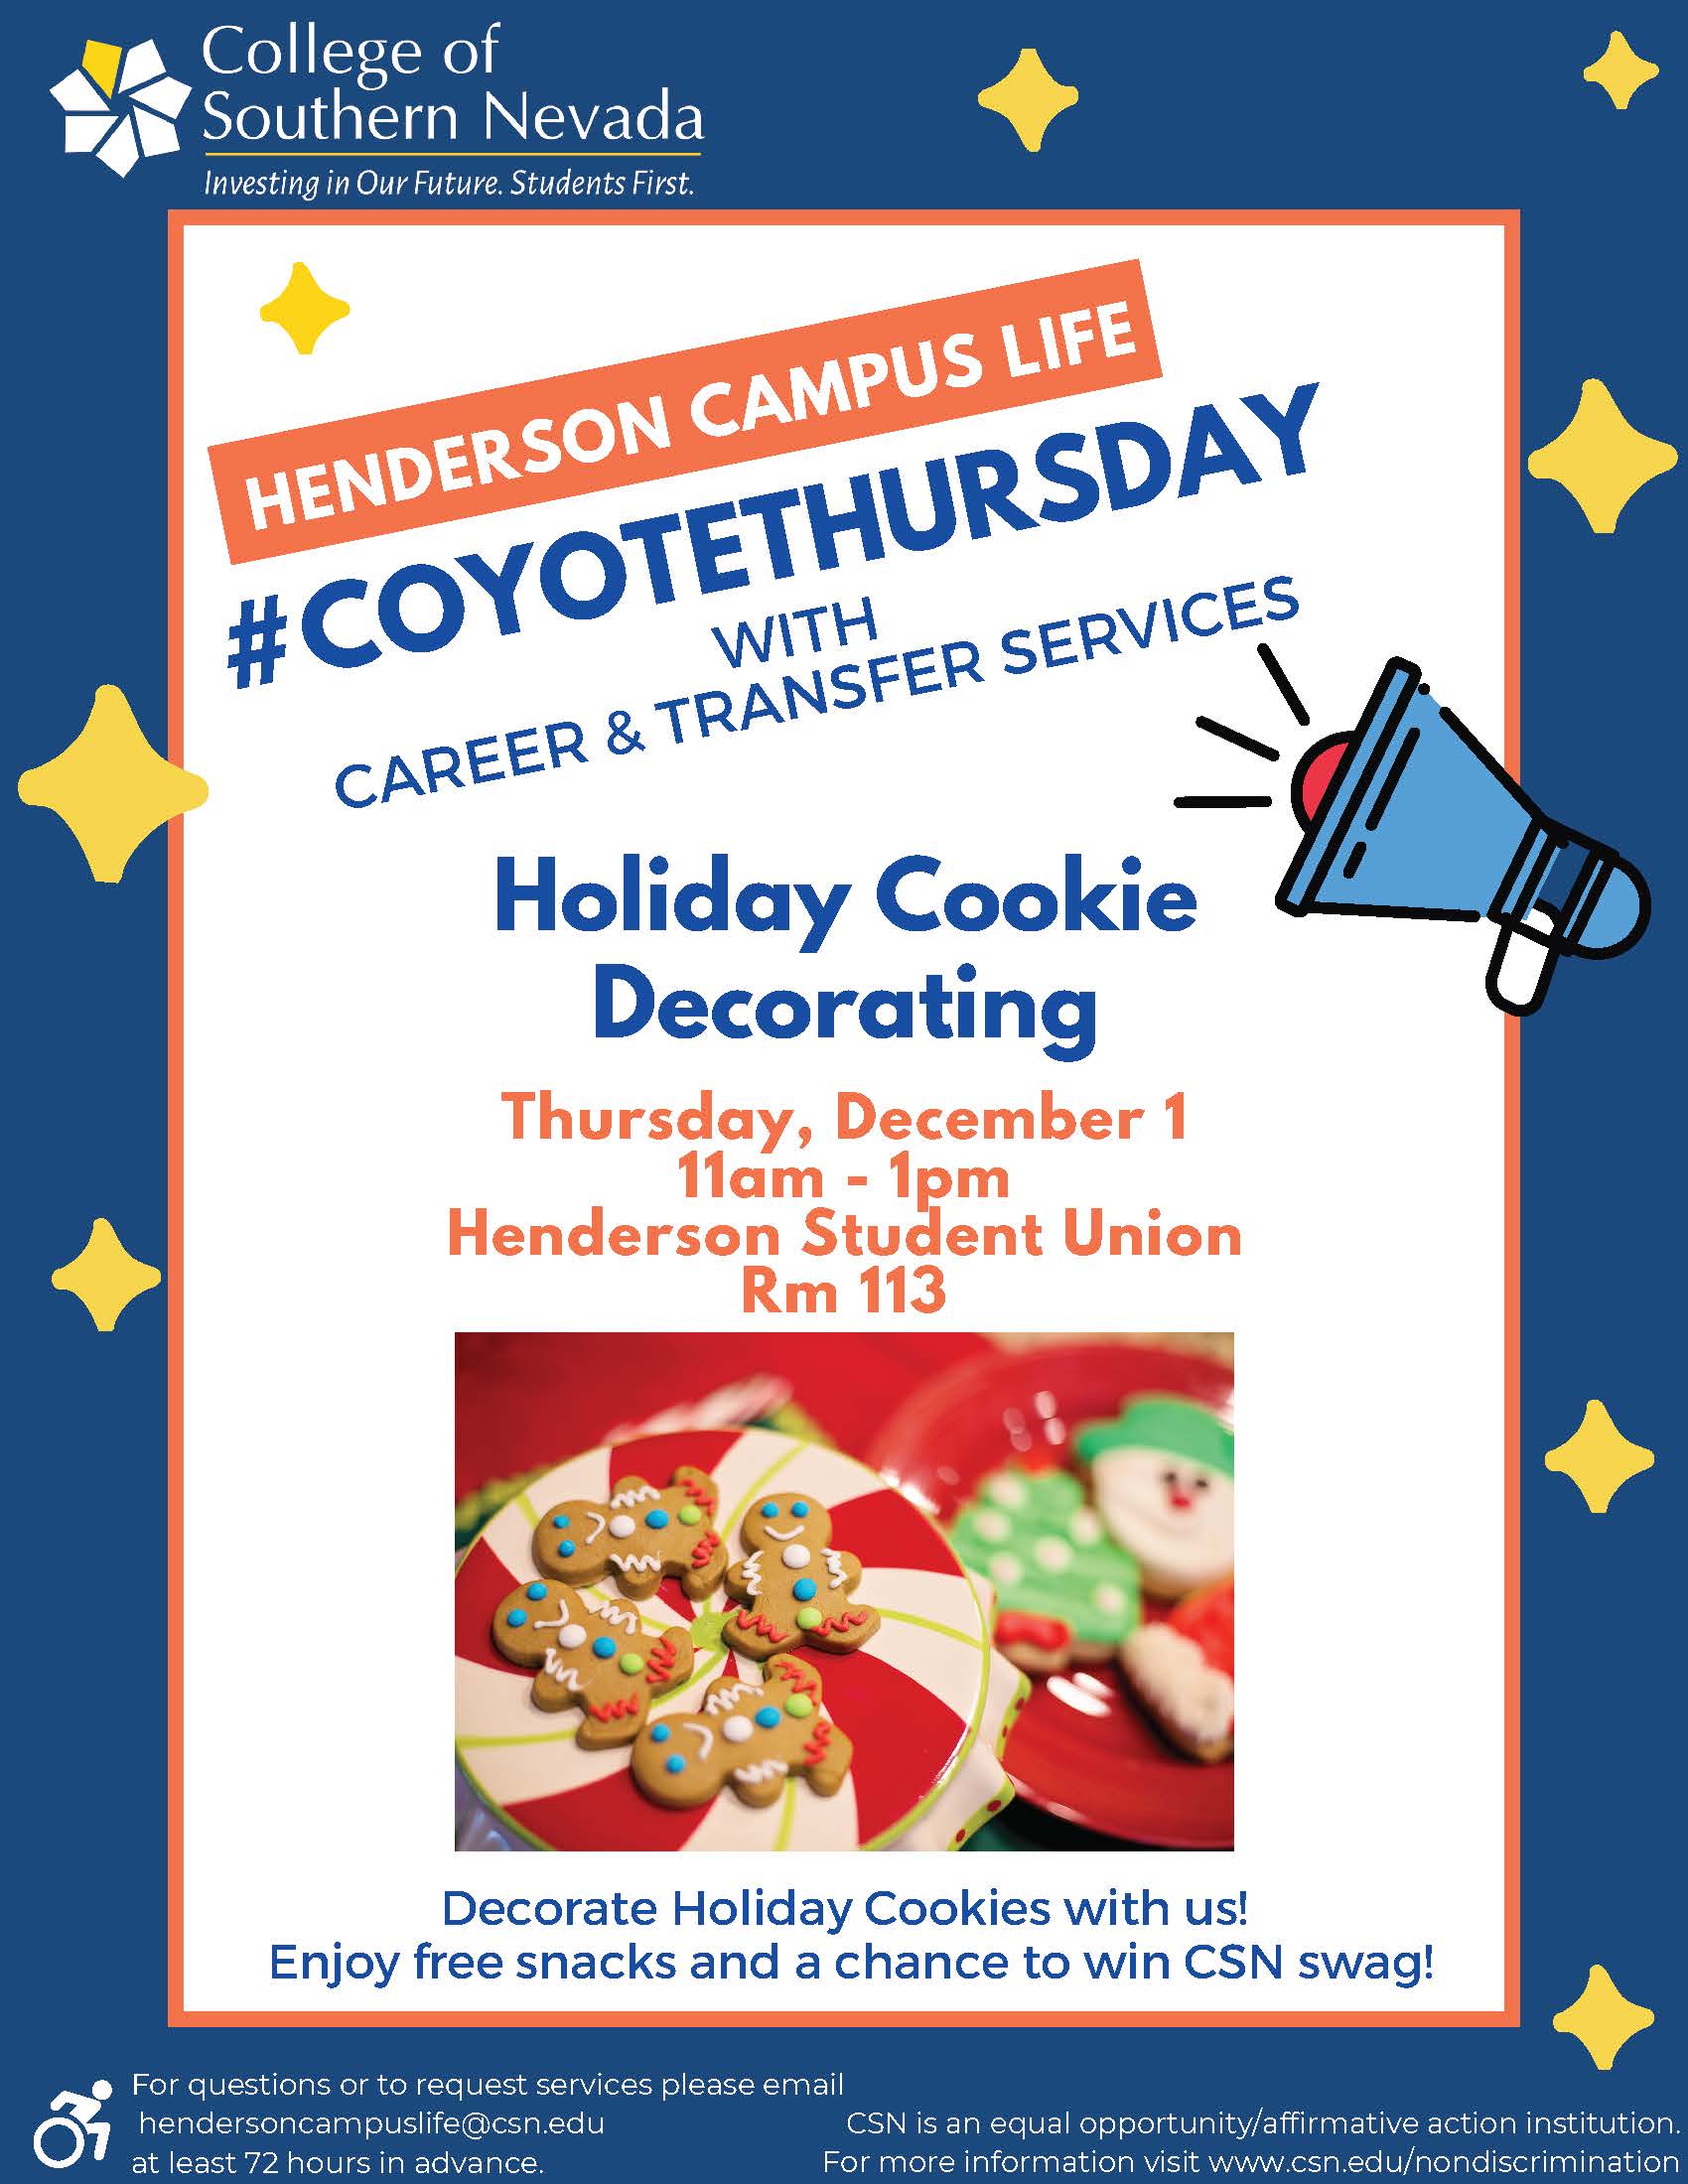 Decorate holiday cookies with Career and Transfer Services 